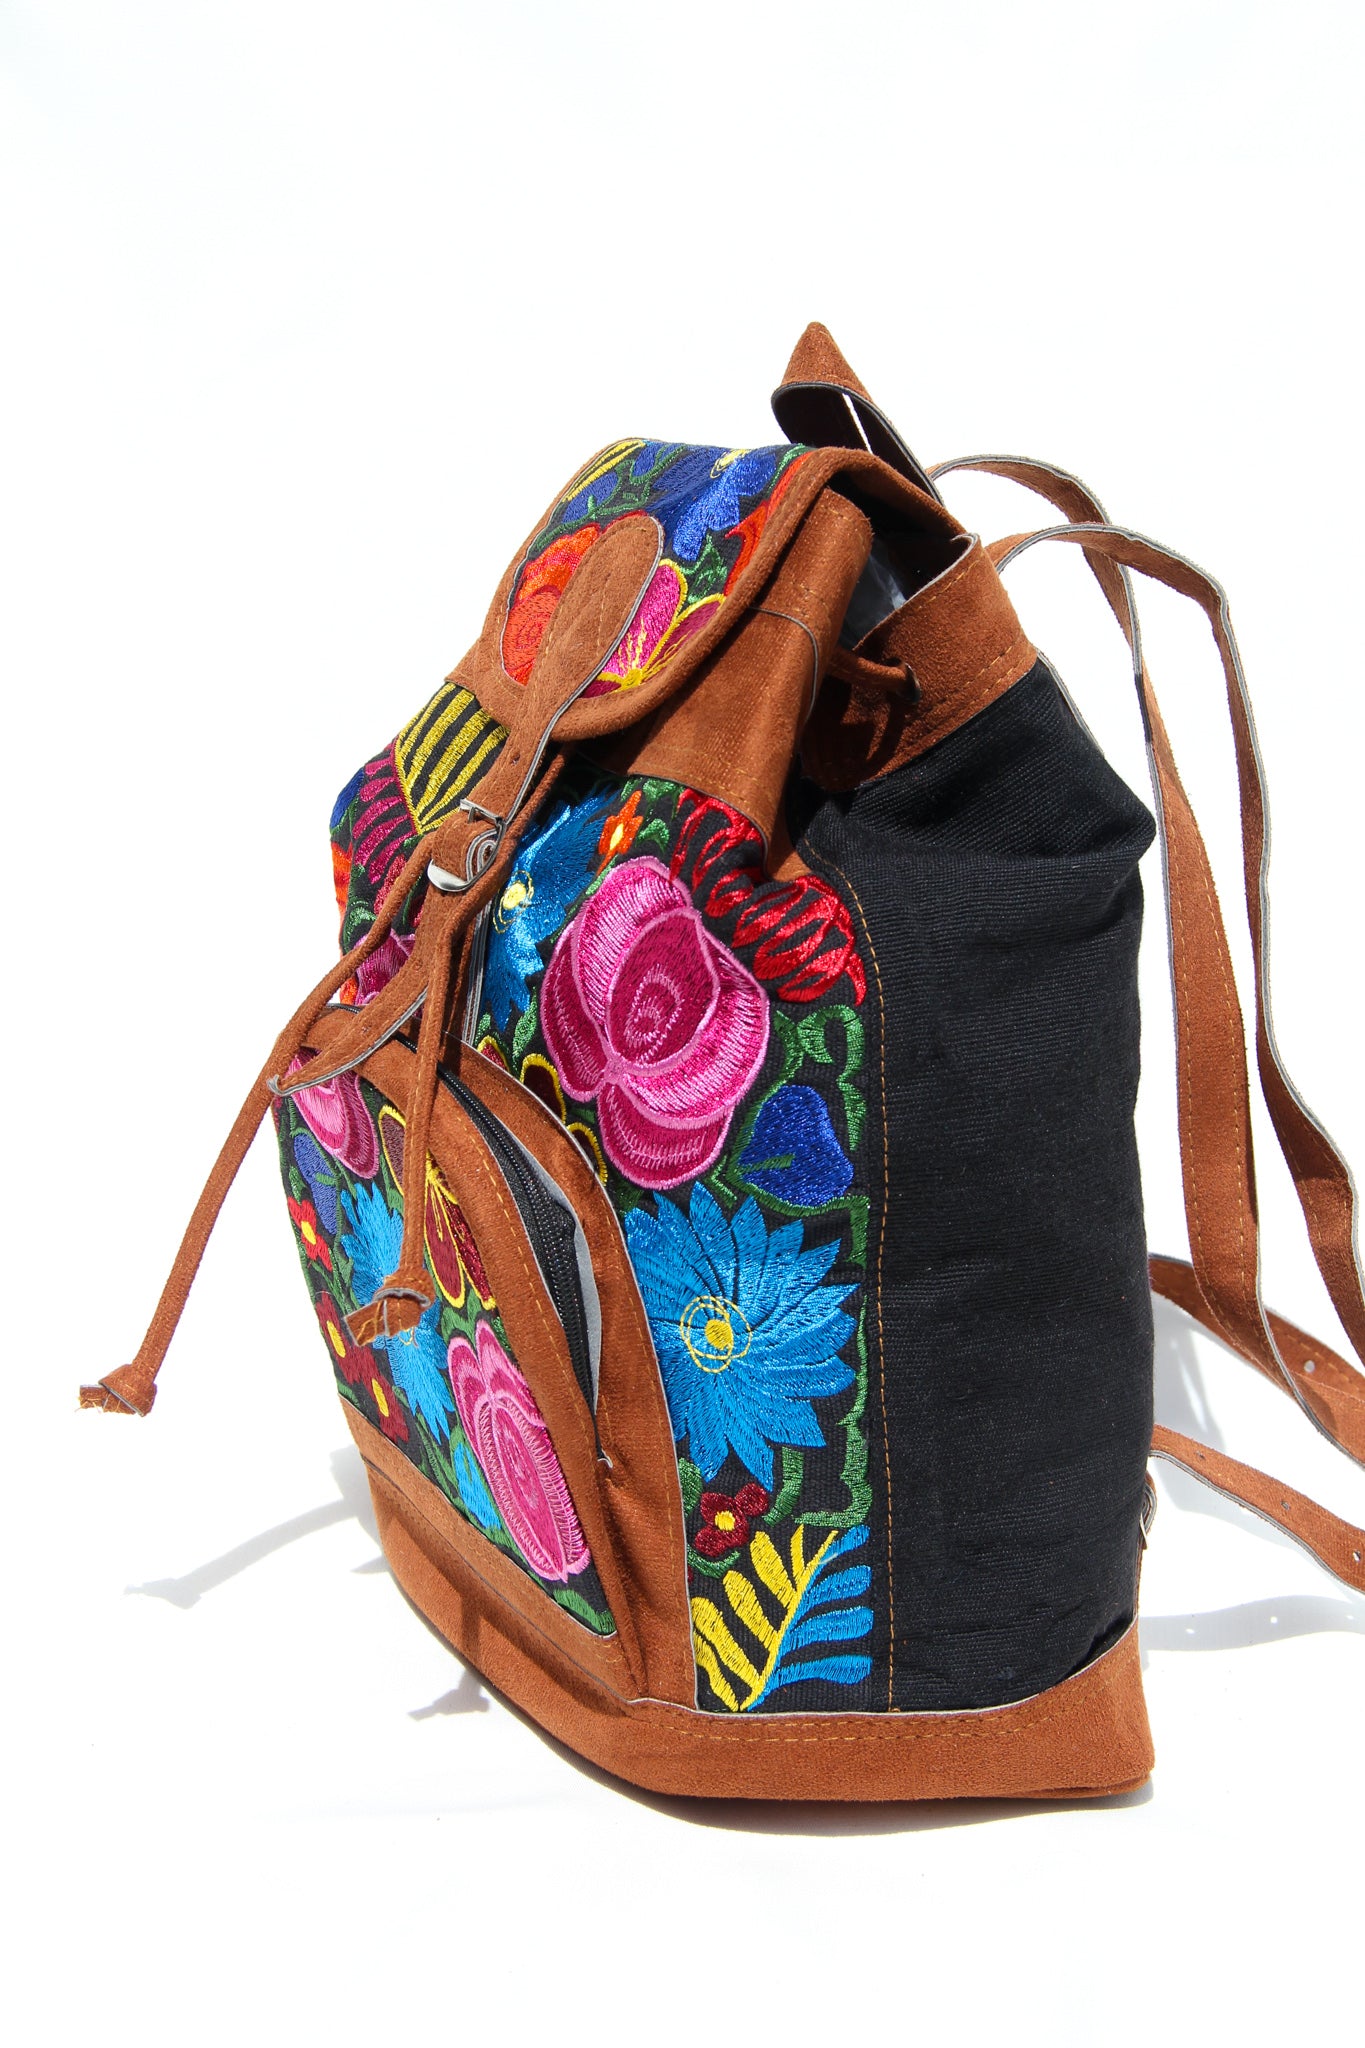 colorful huipil floral embroidery backpack with black woven fabric and faux suede contrast with adjustable straps and front buckle closure with front zipper pocket the prefect travel, hiking or beach bag unique bag great for back to school take this bag on your next destination boho bag and hippie style bag a great standout accessories made in Guatemala